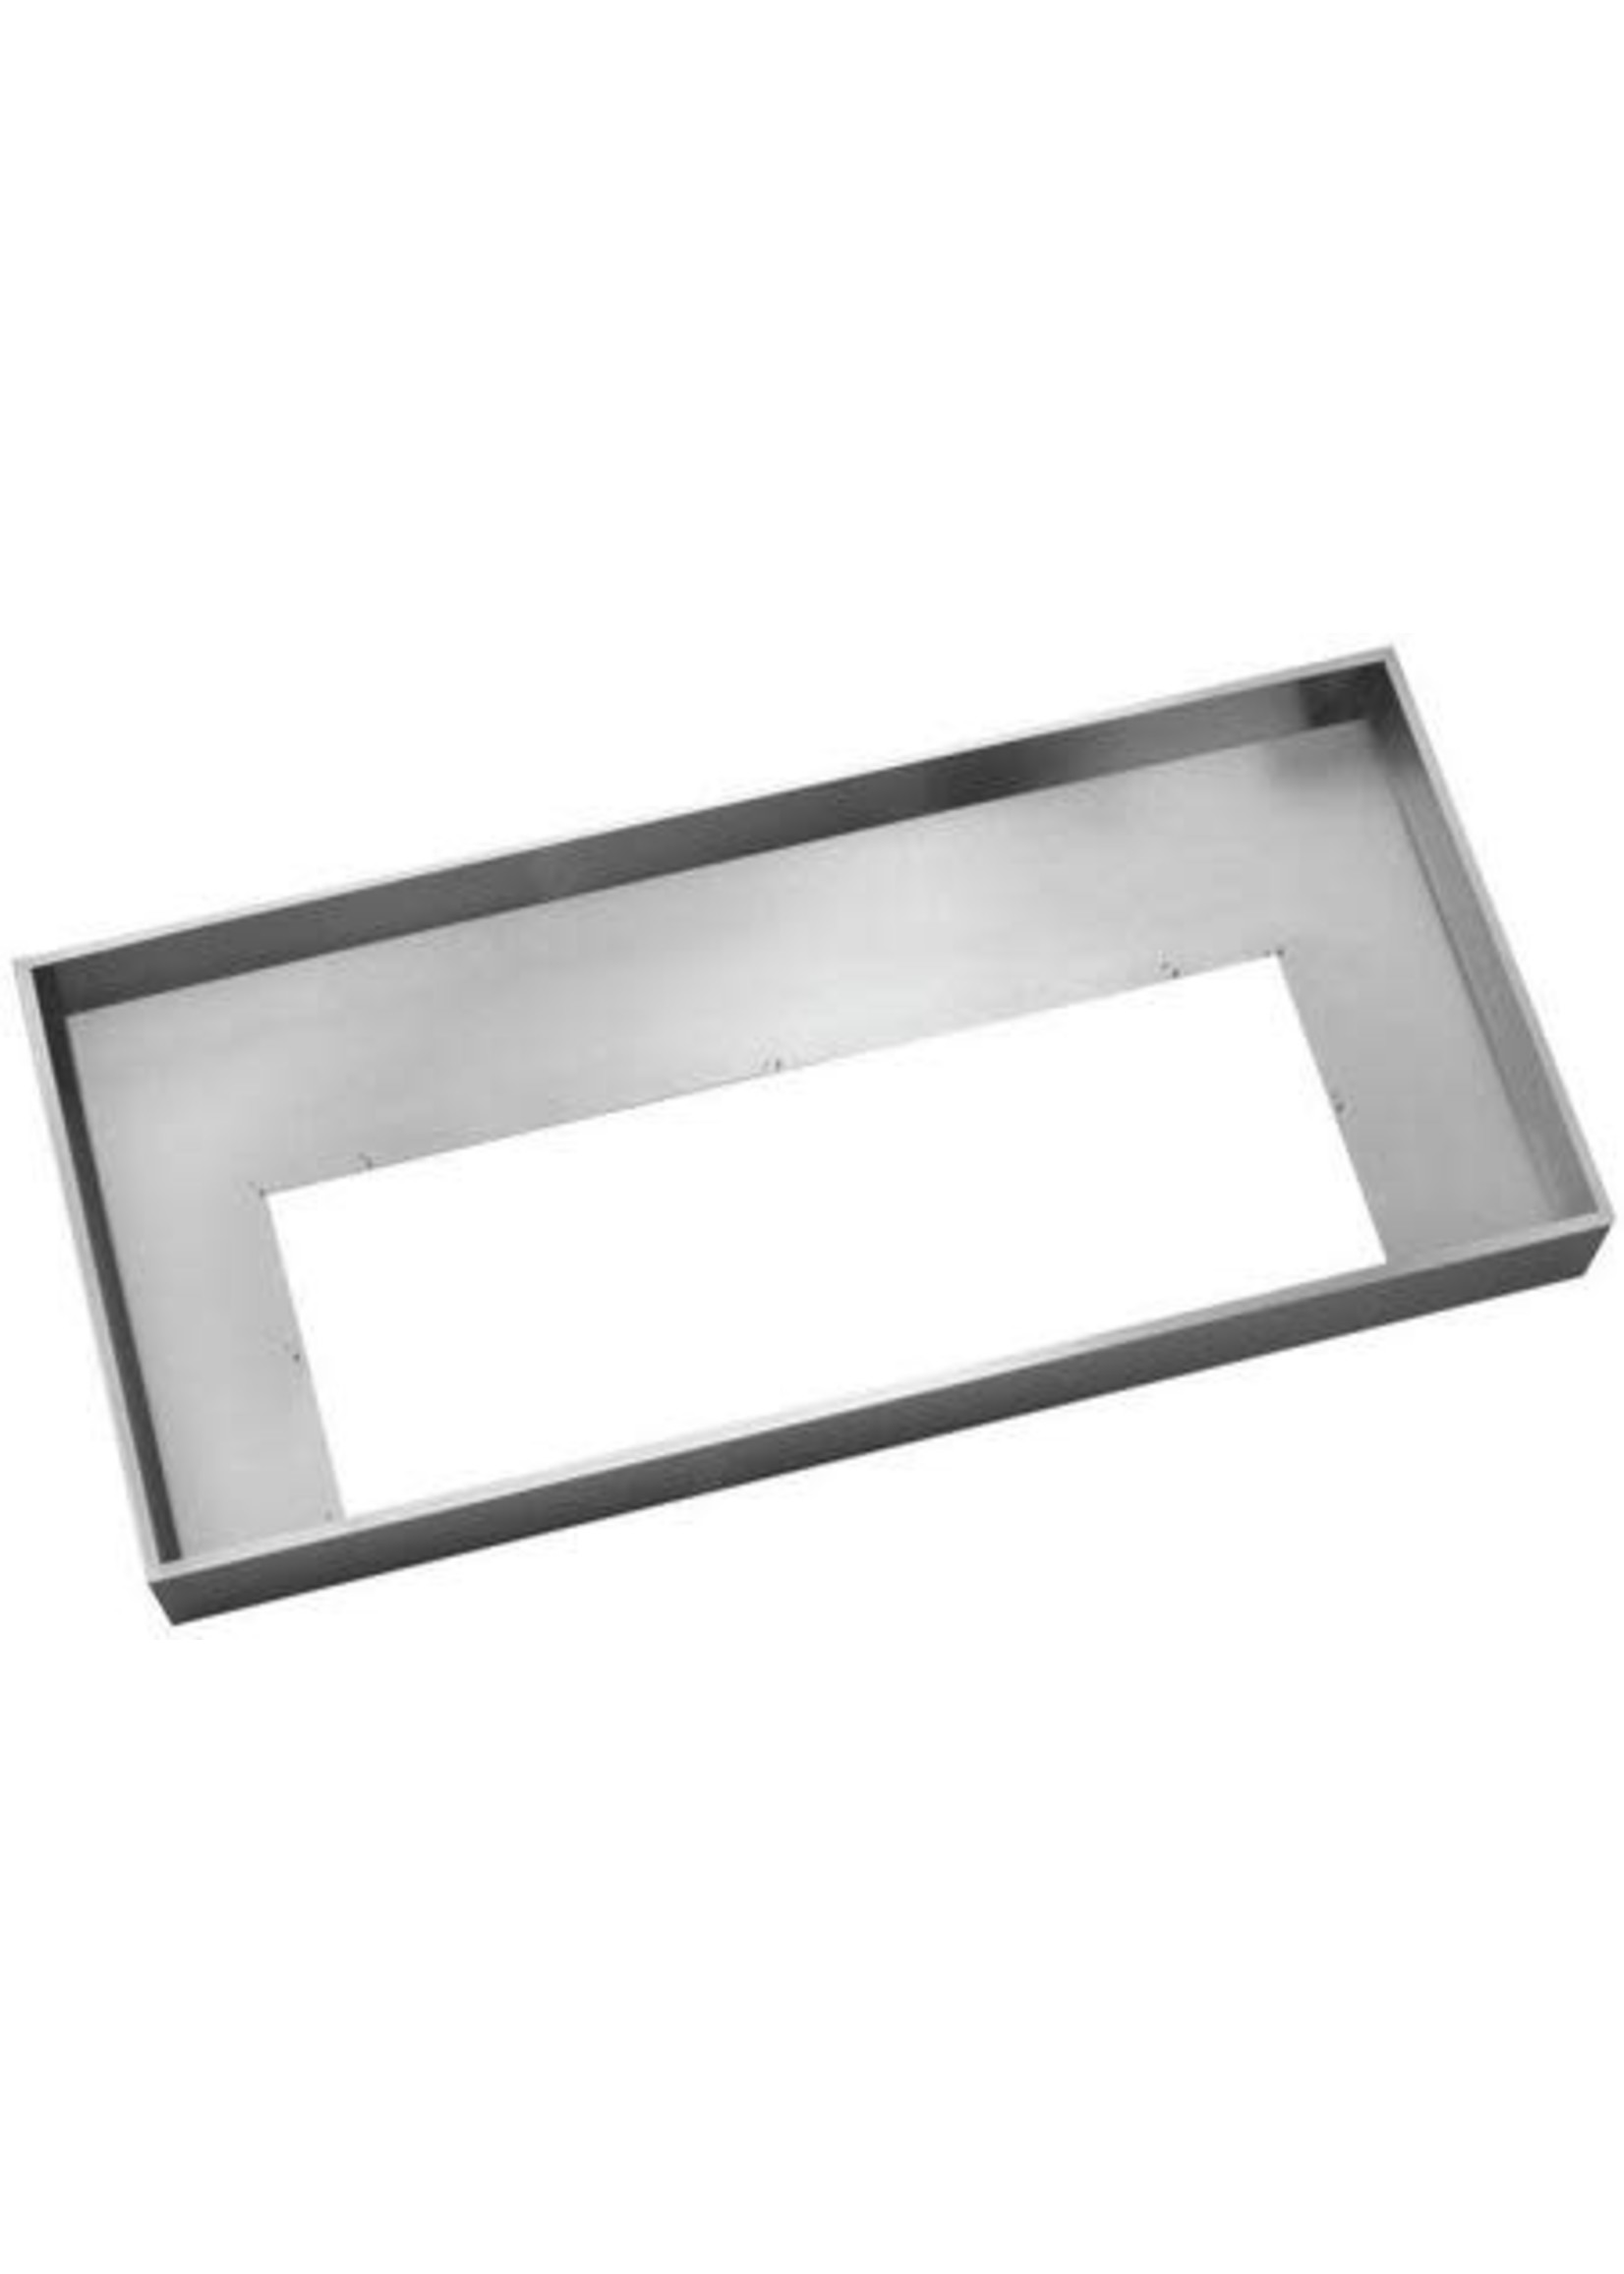 Dacor36 RNIHL36 36" Renaissance Series Integrated Hood Liner For Use with RNIVS1 and RNIVSR1, in Stainless Steel